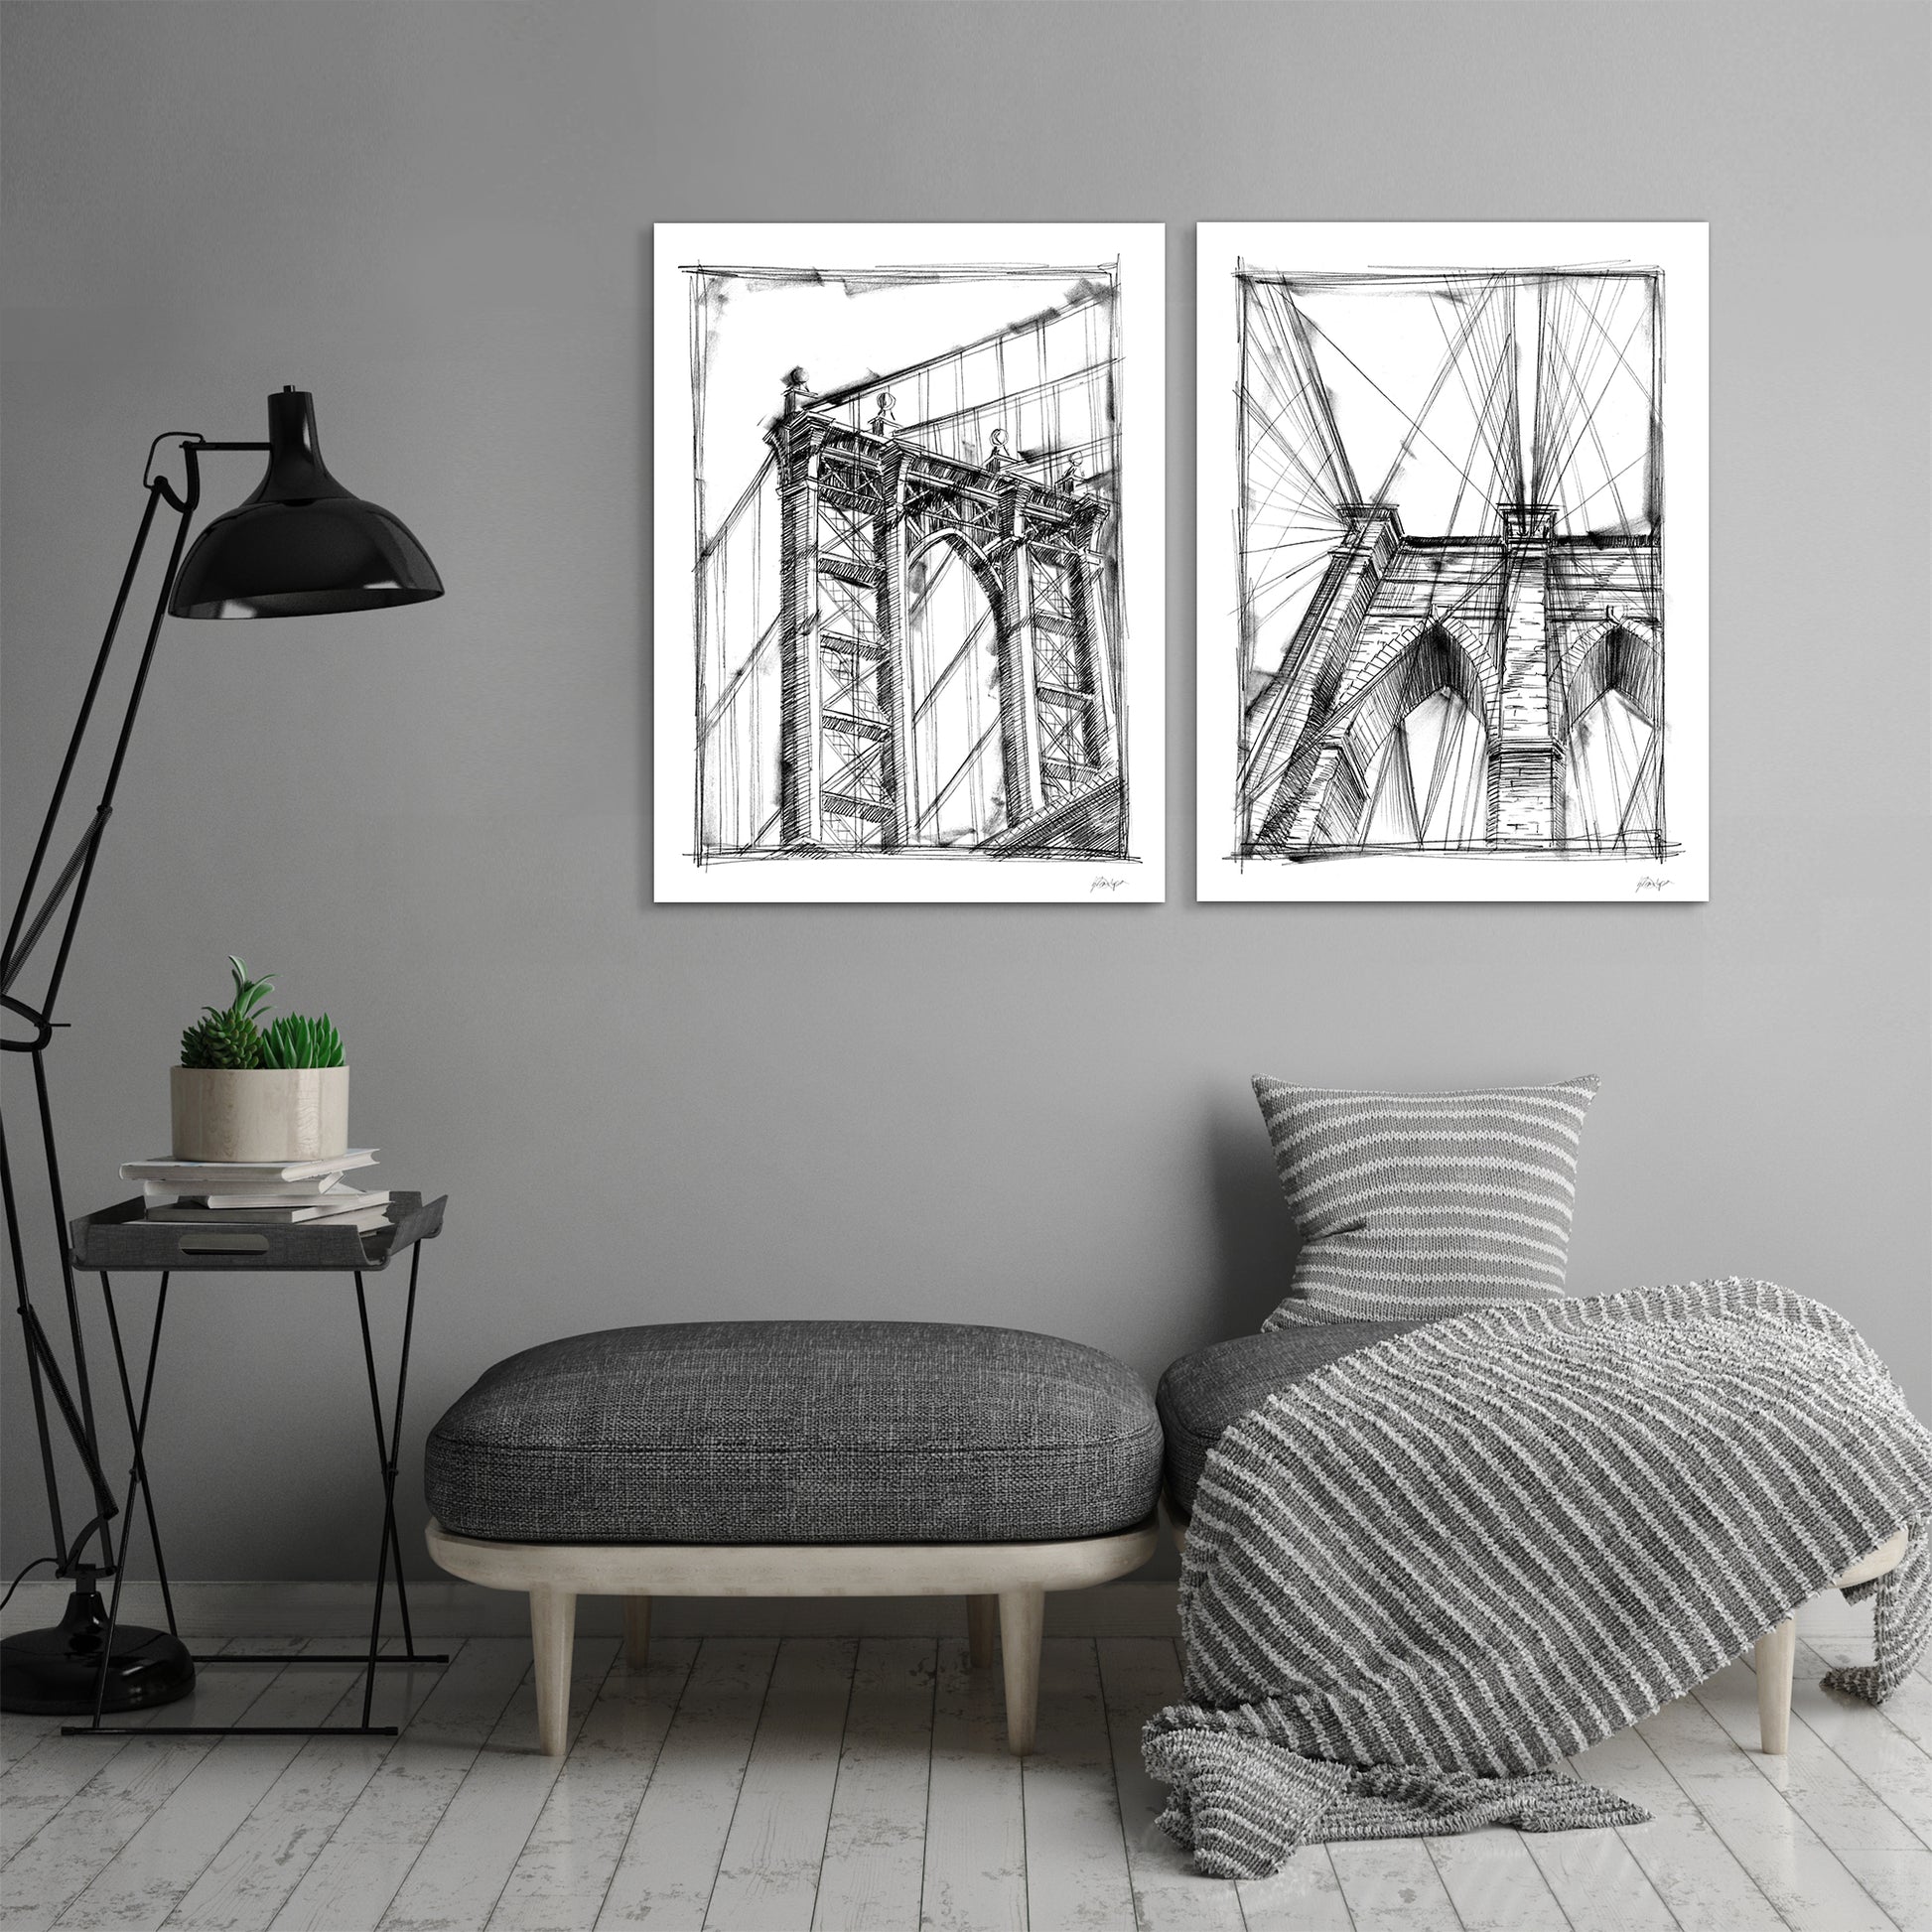 Graphic Architectural Study by World Art Group - 2 Piece Wrapped Canvas Set